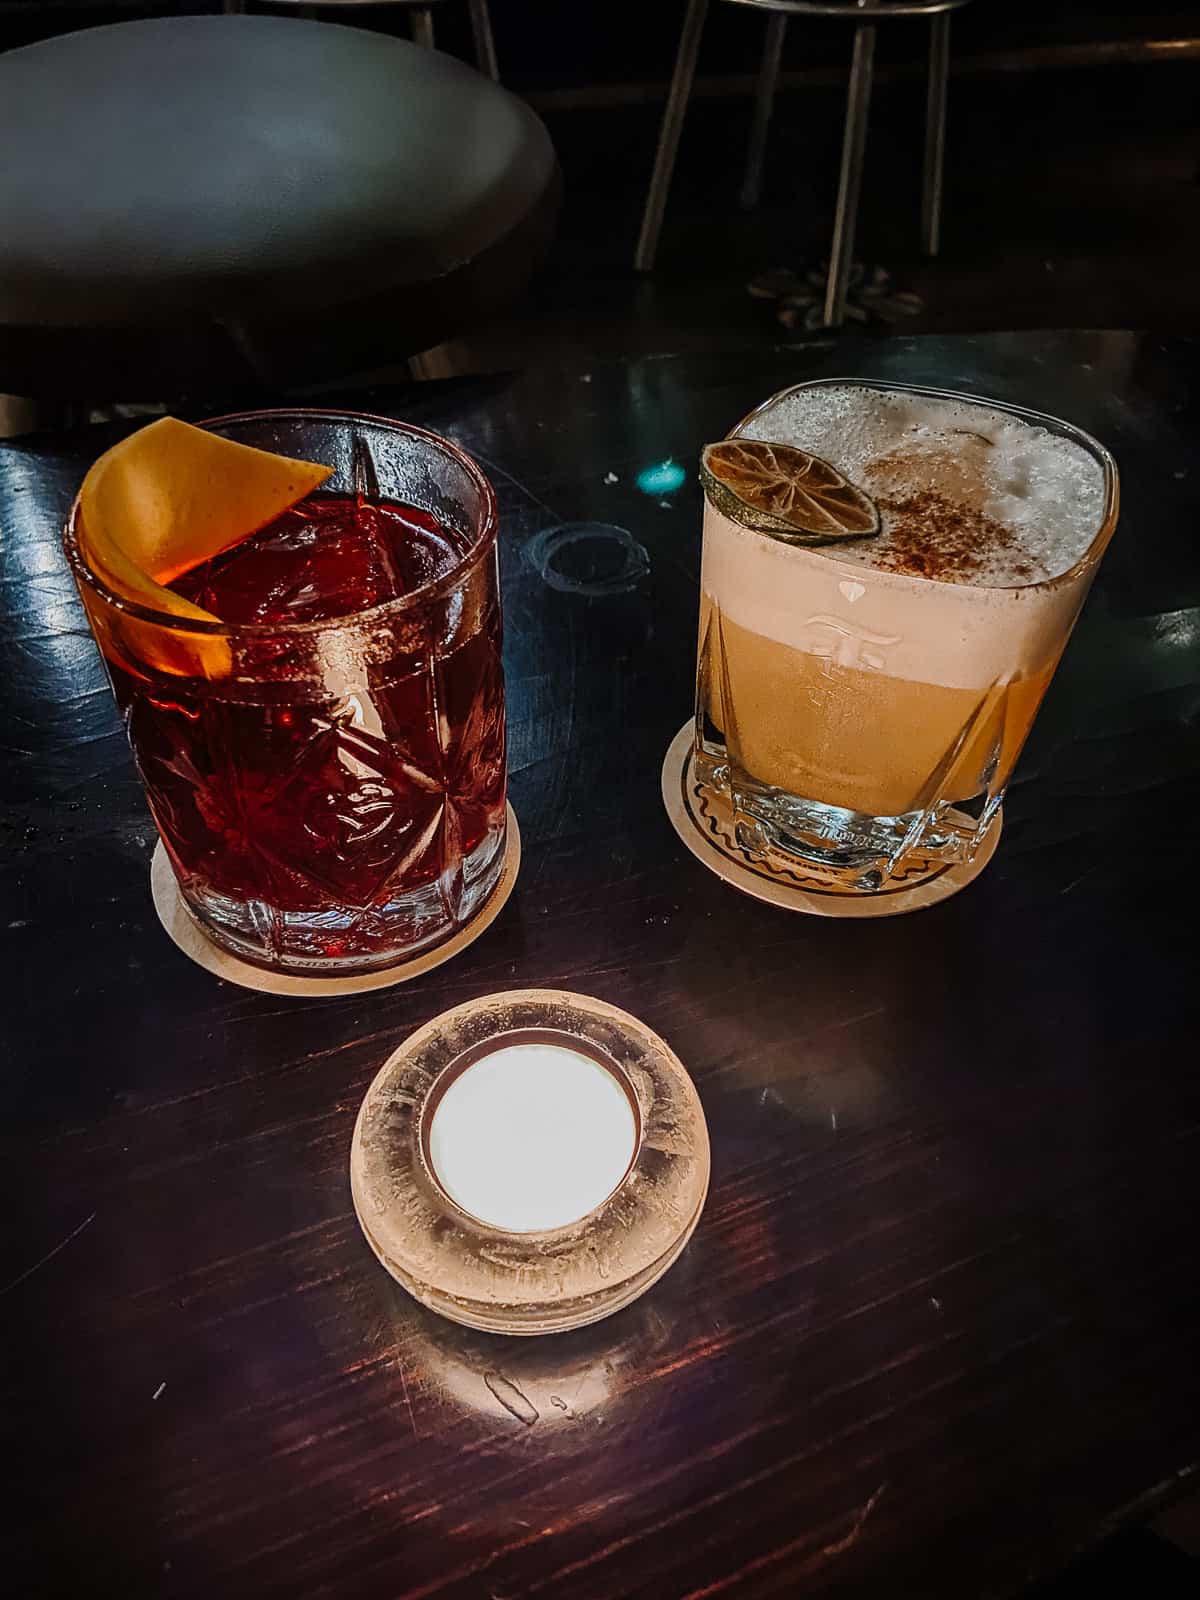 Two artisanal cocktails sit invitingly on a dark wood table; one is a deep red with a citrus peel garnish, and the other is a creamy, frothy concoction topped with a dried citrus slice, both casting a cozy glow next to a round, lit candle.